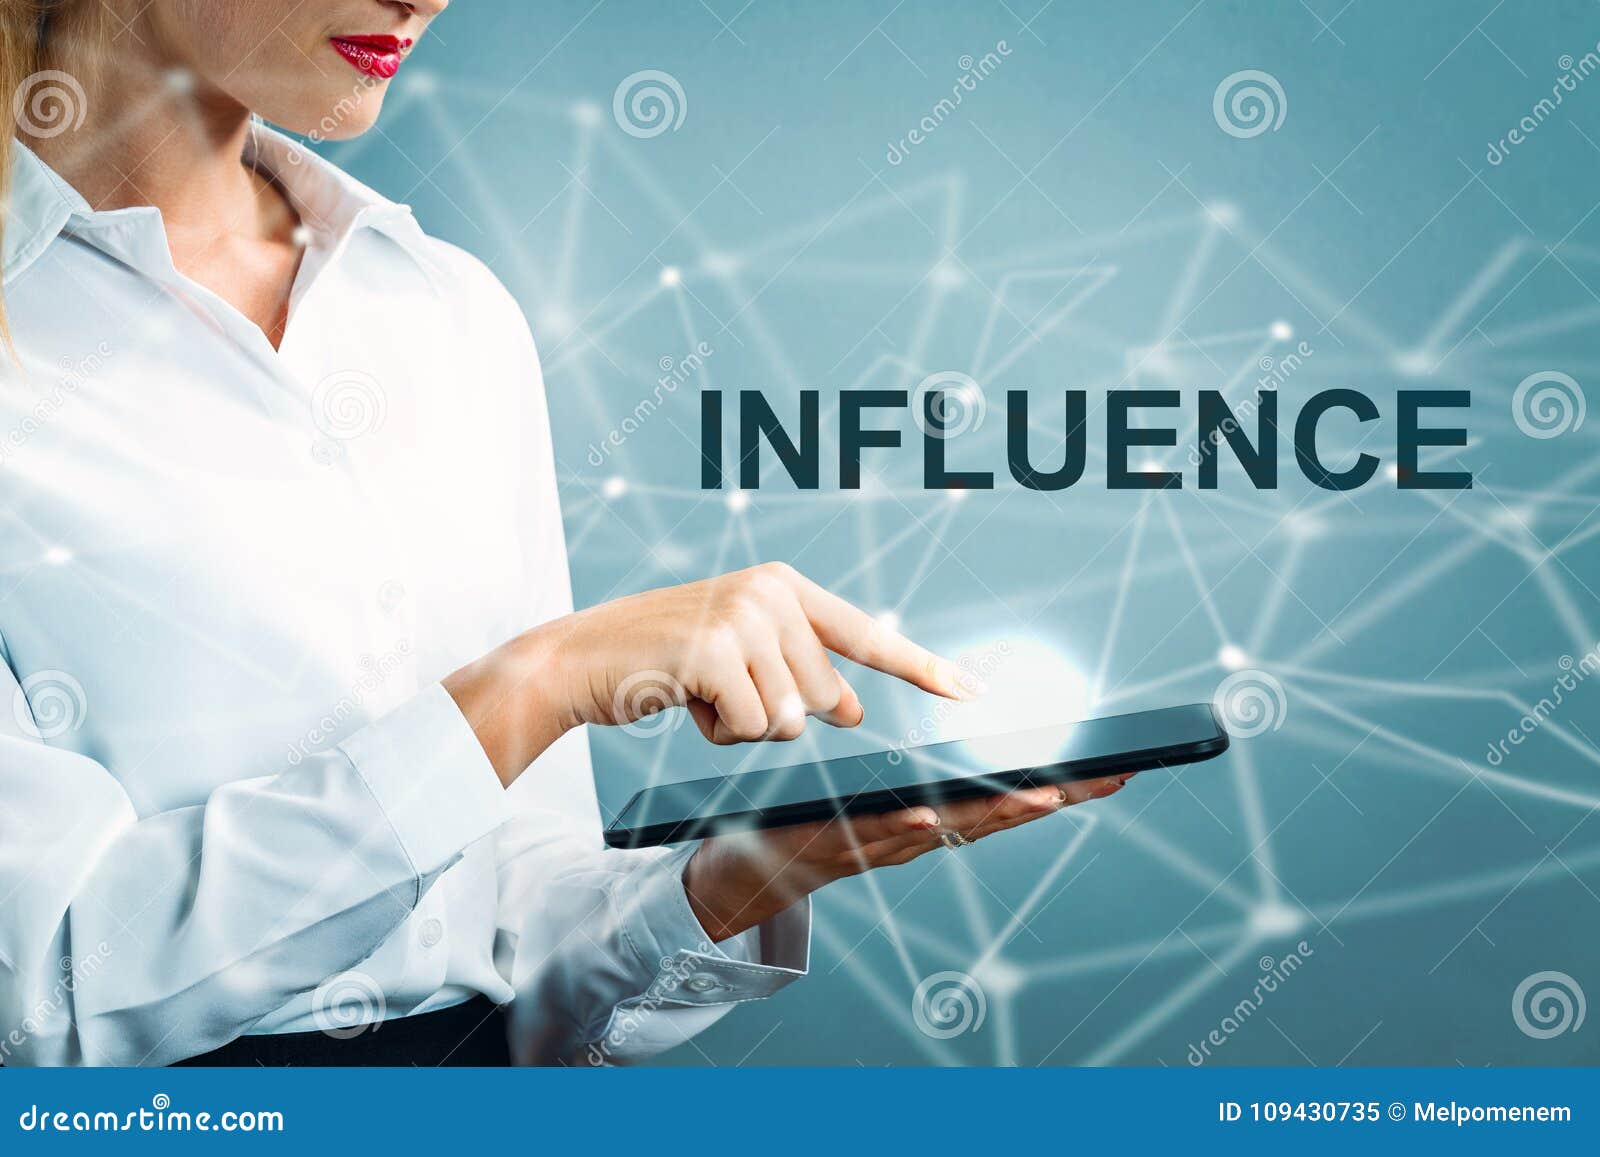 influence text with business woman